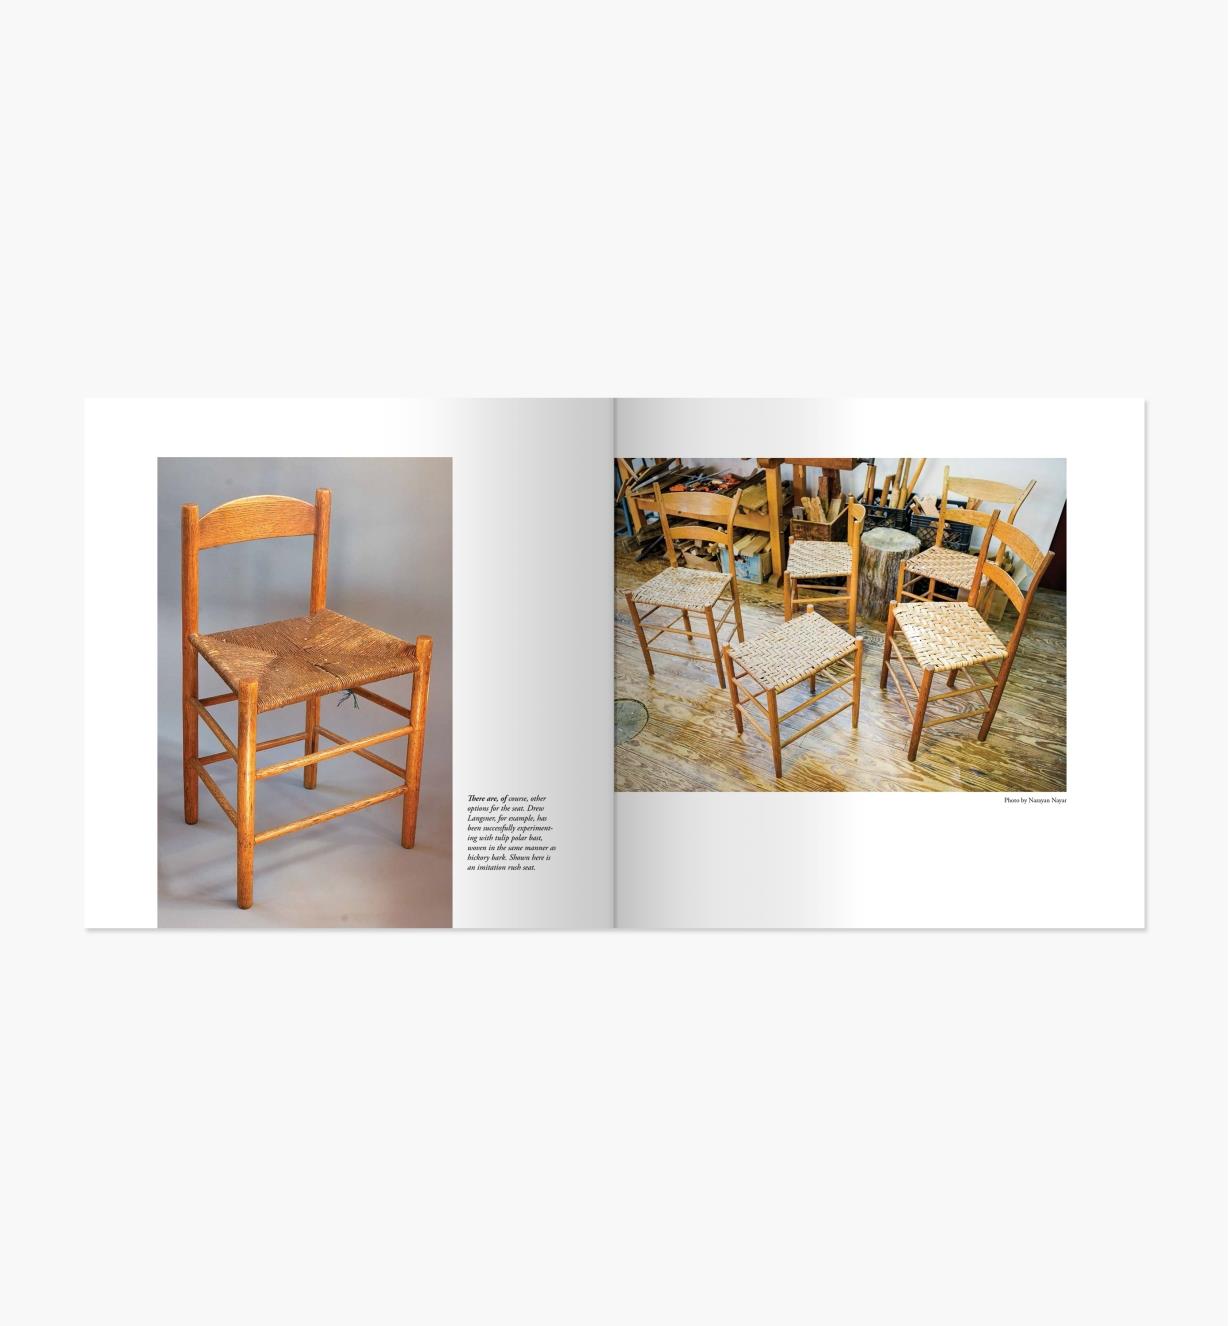 20L0377 - Make a Chair from a Tree, Third Edition